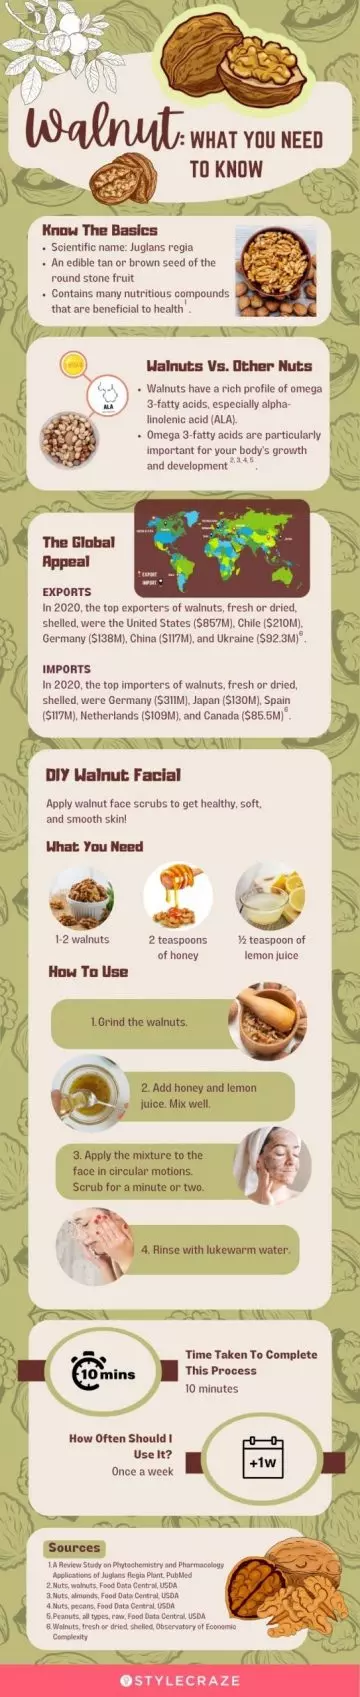 walnut what you need to know (infographic)